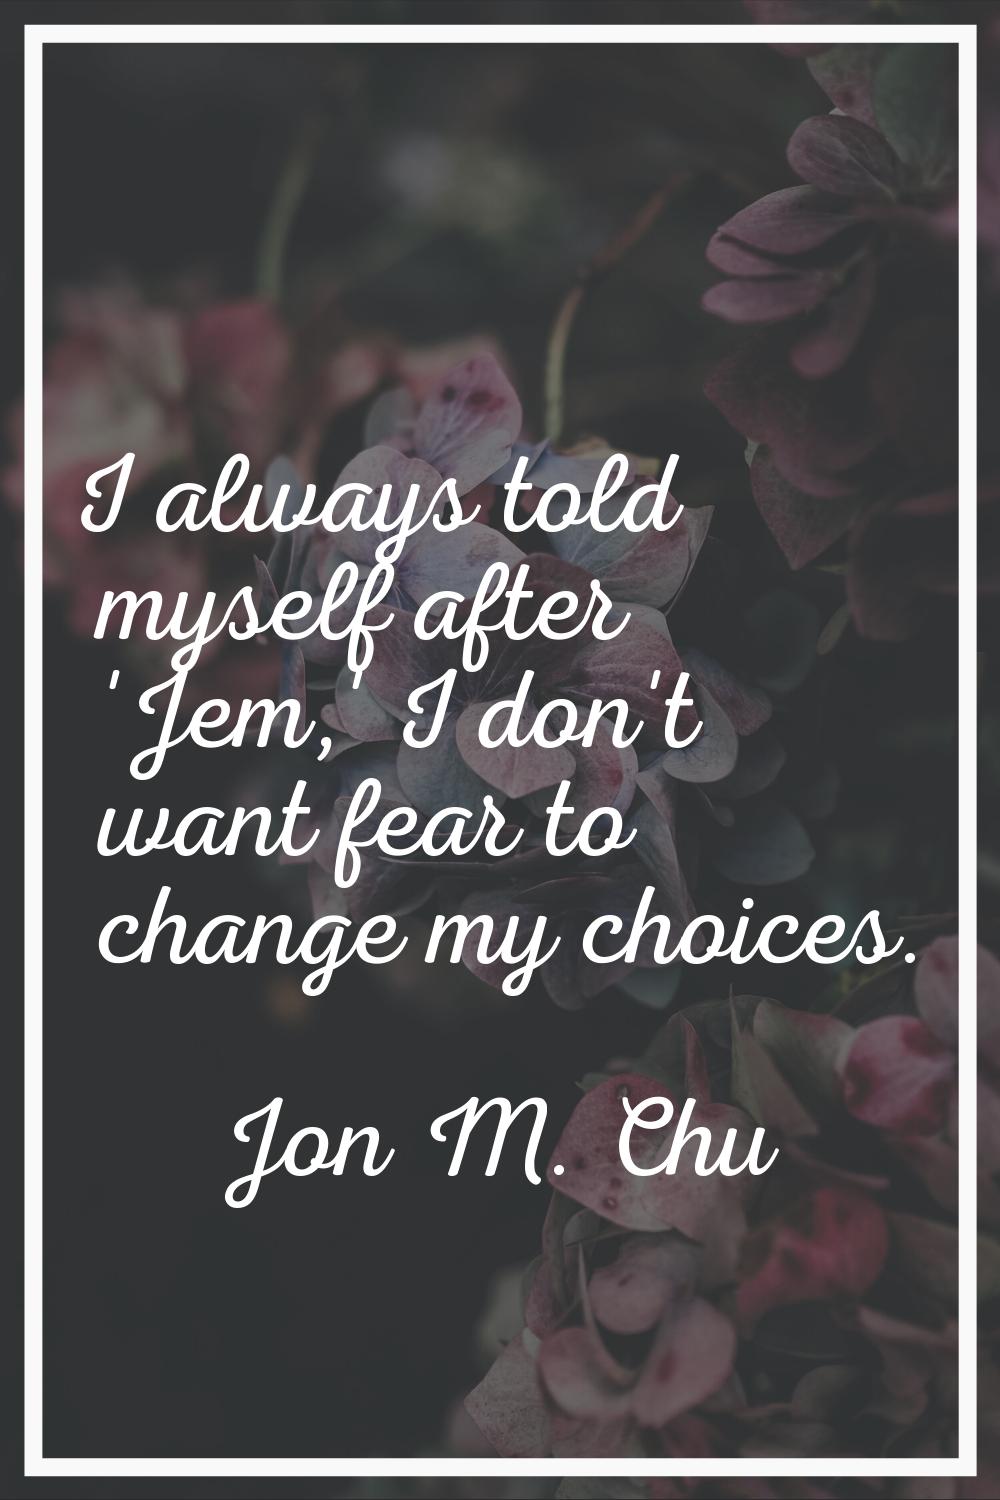 I always told myself after 'Jem,' I don't want fear to change my choices.